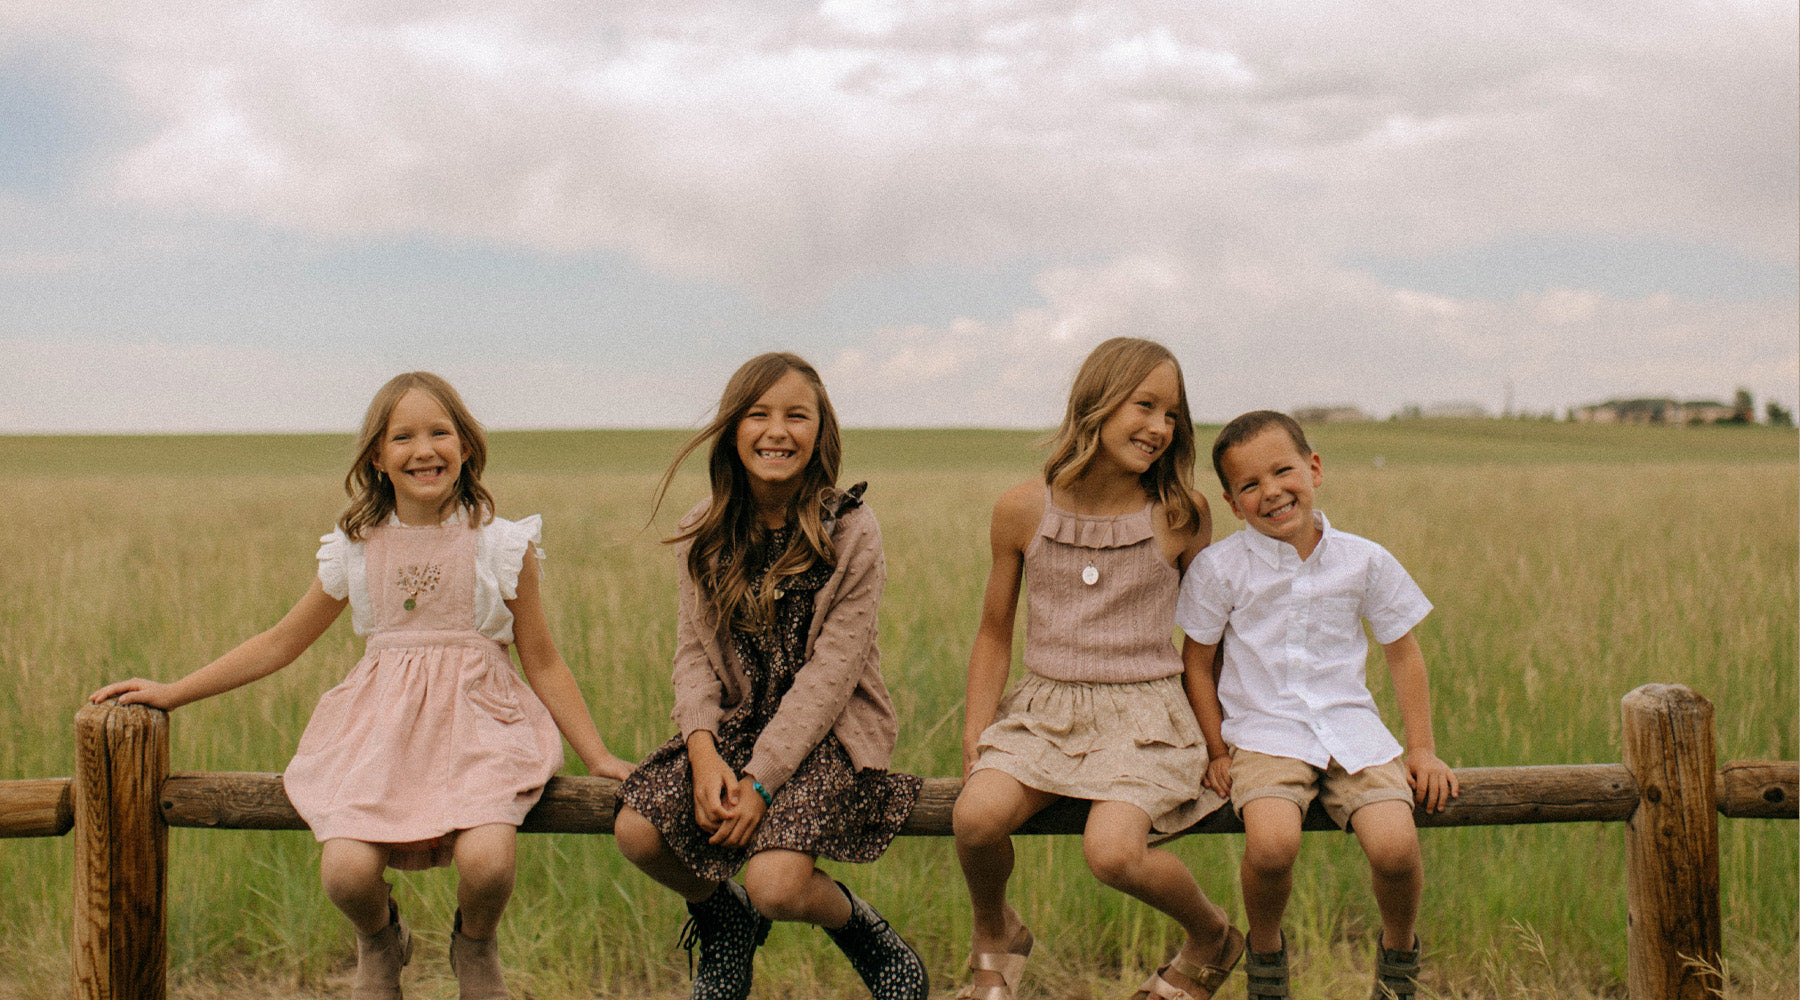 The Ultimate Family Photos Guide: How to Keep the Kids Happy & Get Great Photos